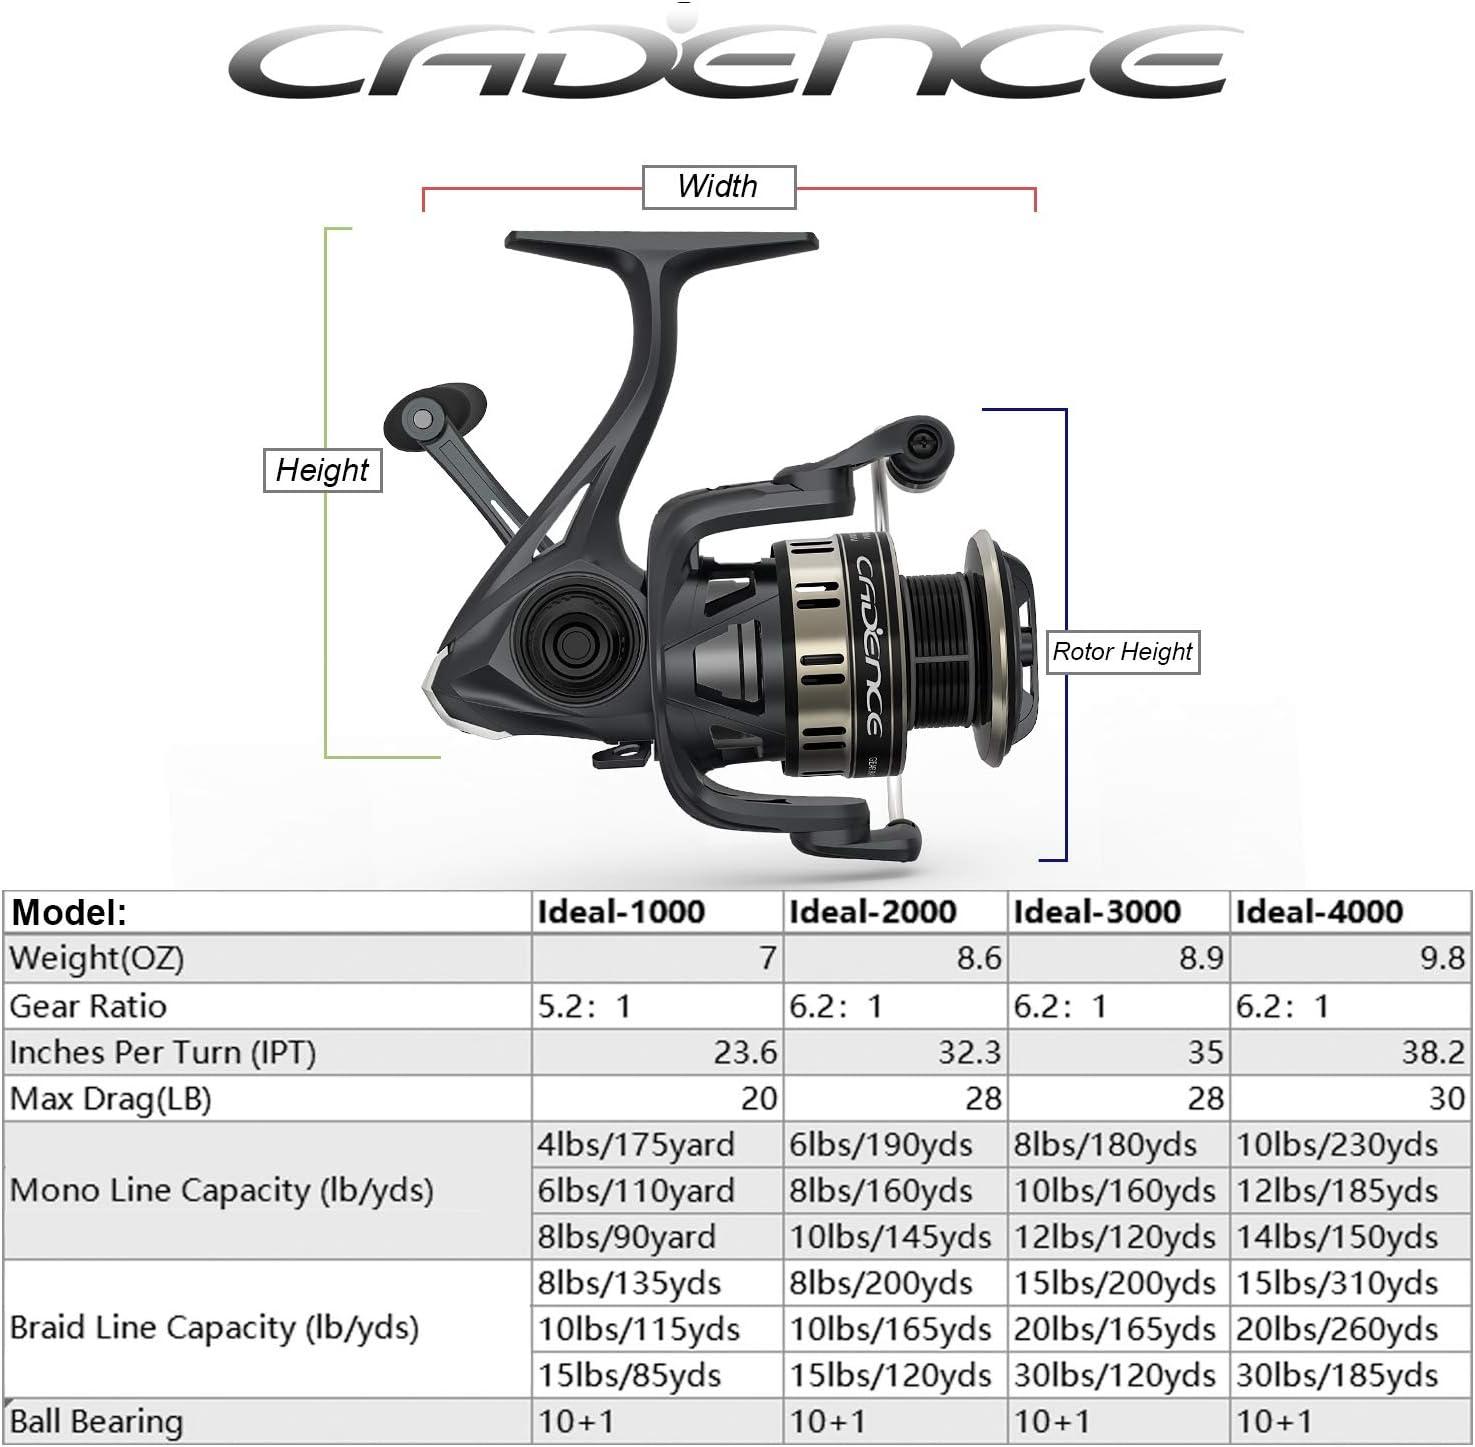 Cadence Ideal Spinning Reel, Super Smooth Fishing Reels with 10 + 1 BB for  Freshwater, Durable and Powerful Reel with 30LBs Max Drag & 6.2:1, Great  Value& Tuned Performance 1000